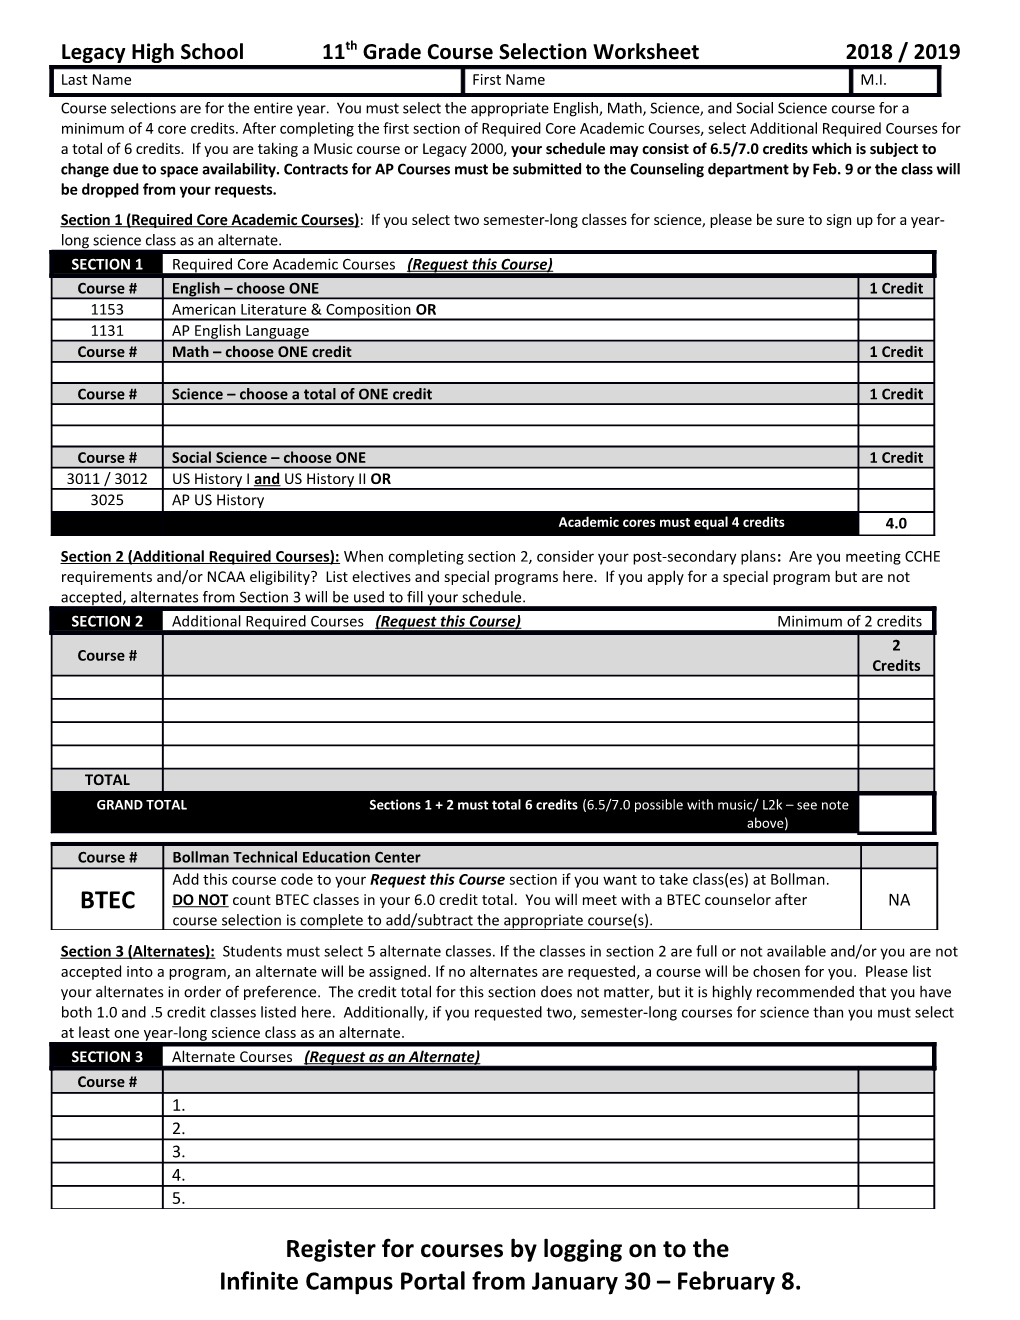 Legacy High School11th Grade Course Selection Worksheet2018 / 2019